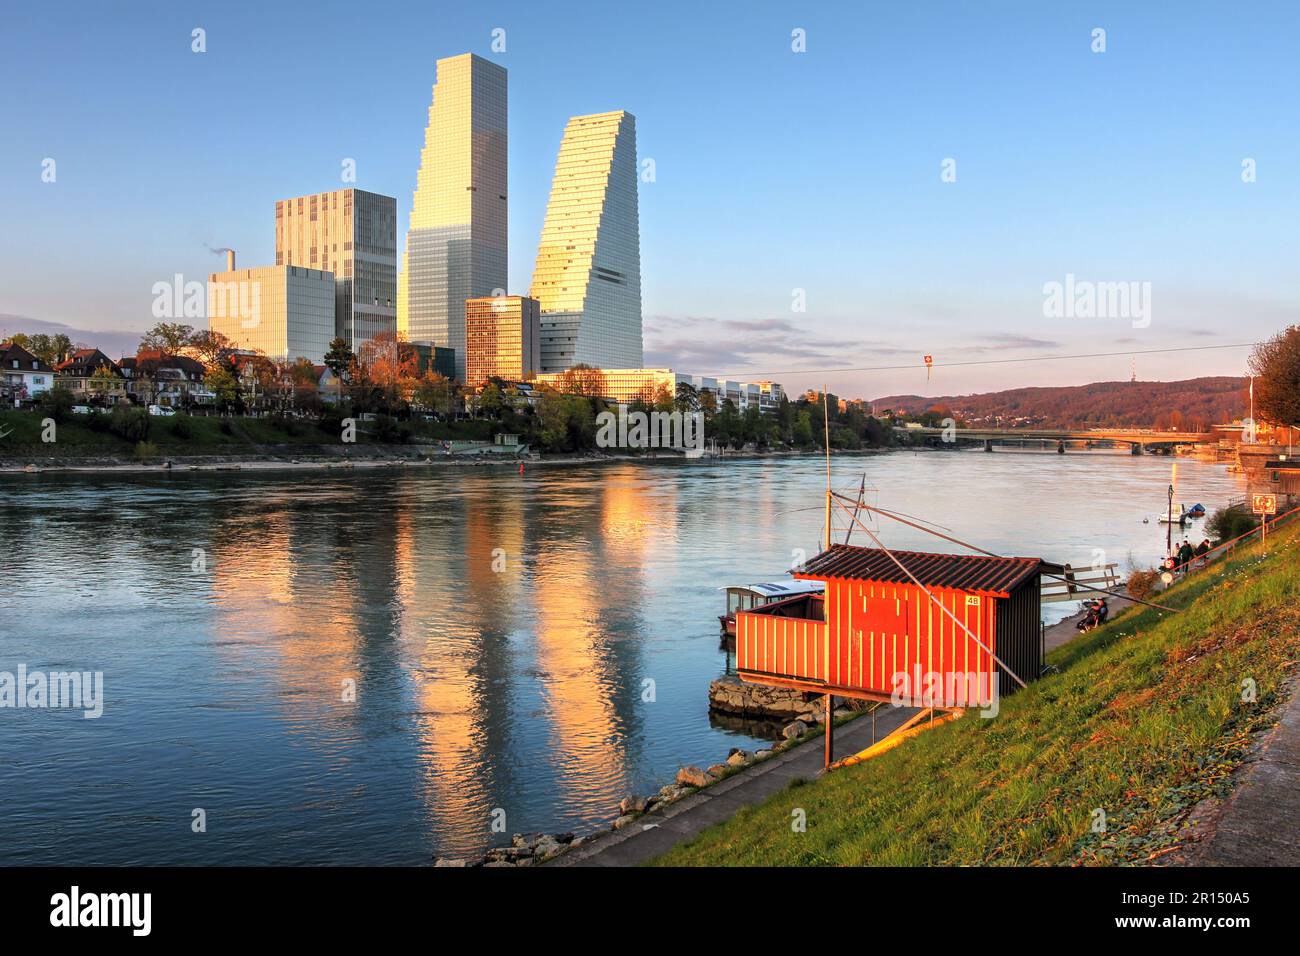 The two skyscrapers commonly referred to as Roche Towers have been built in 2015 and 2022 respectively along the Rhine River. The taller one, finished Stock Photo